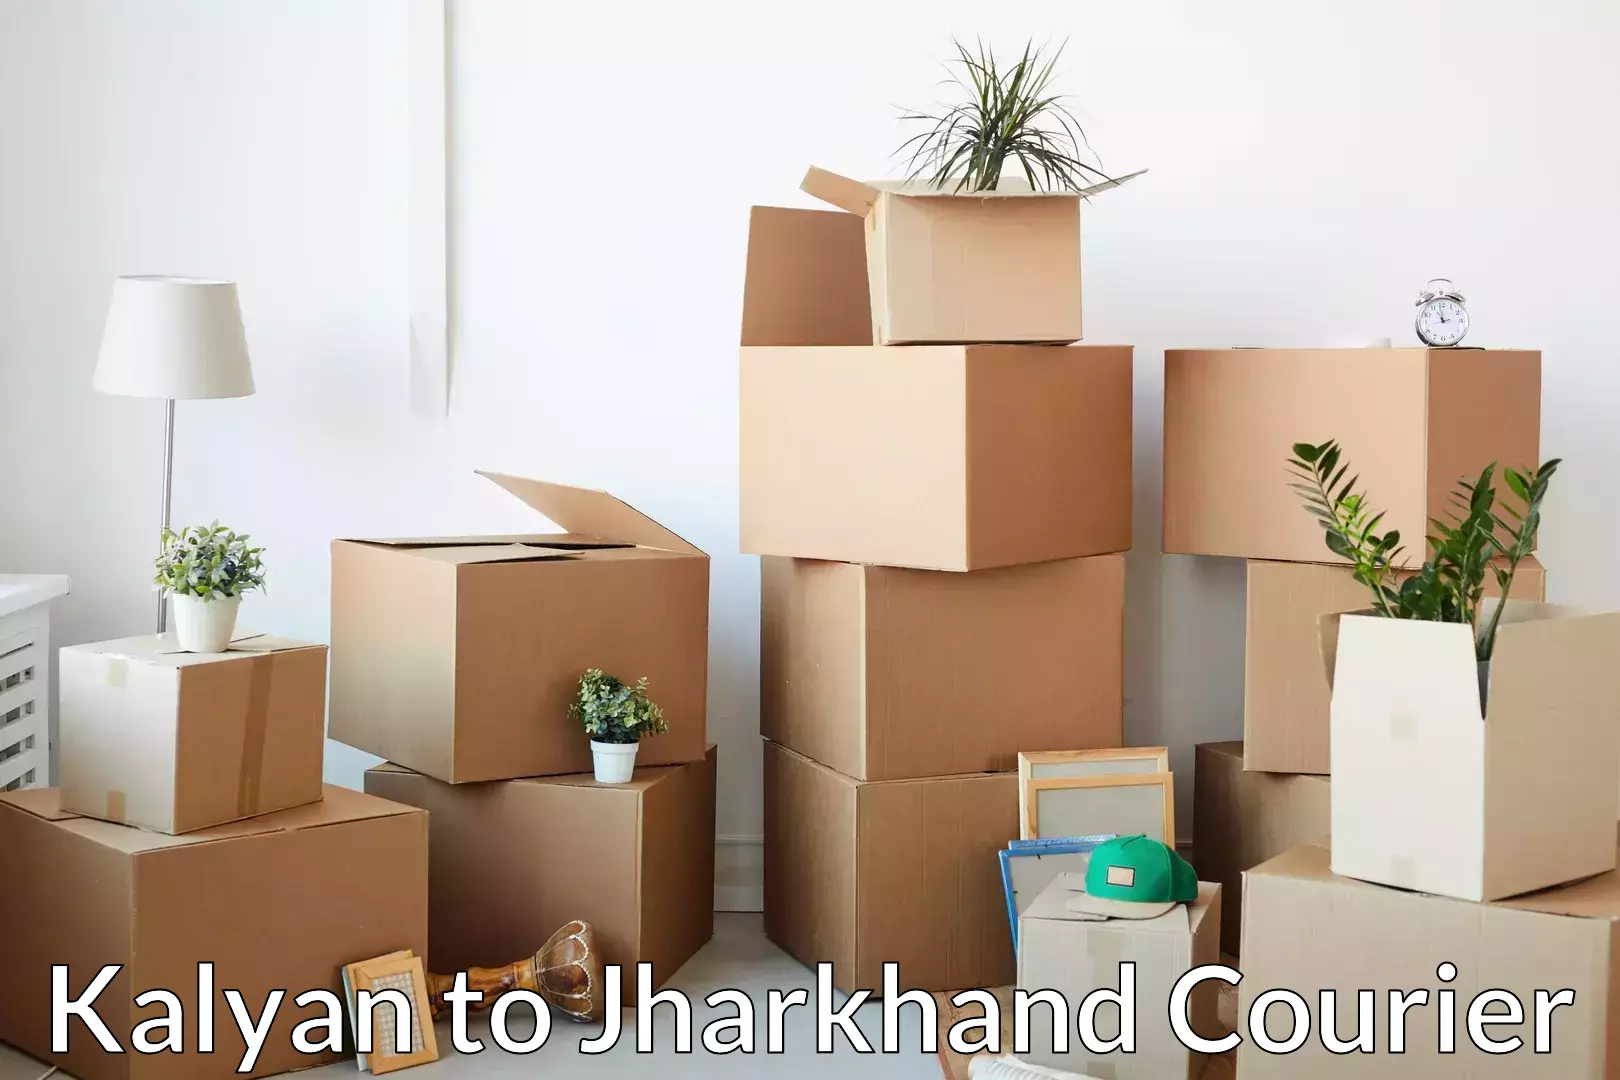 Trusted moving company in Kalyan to Bara Boarijor